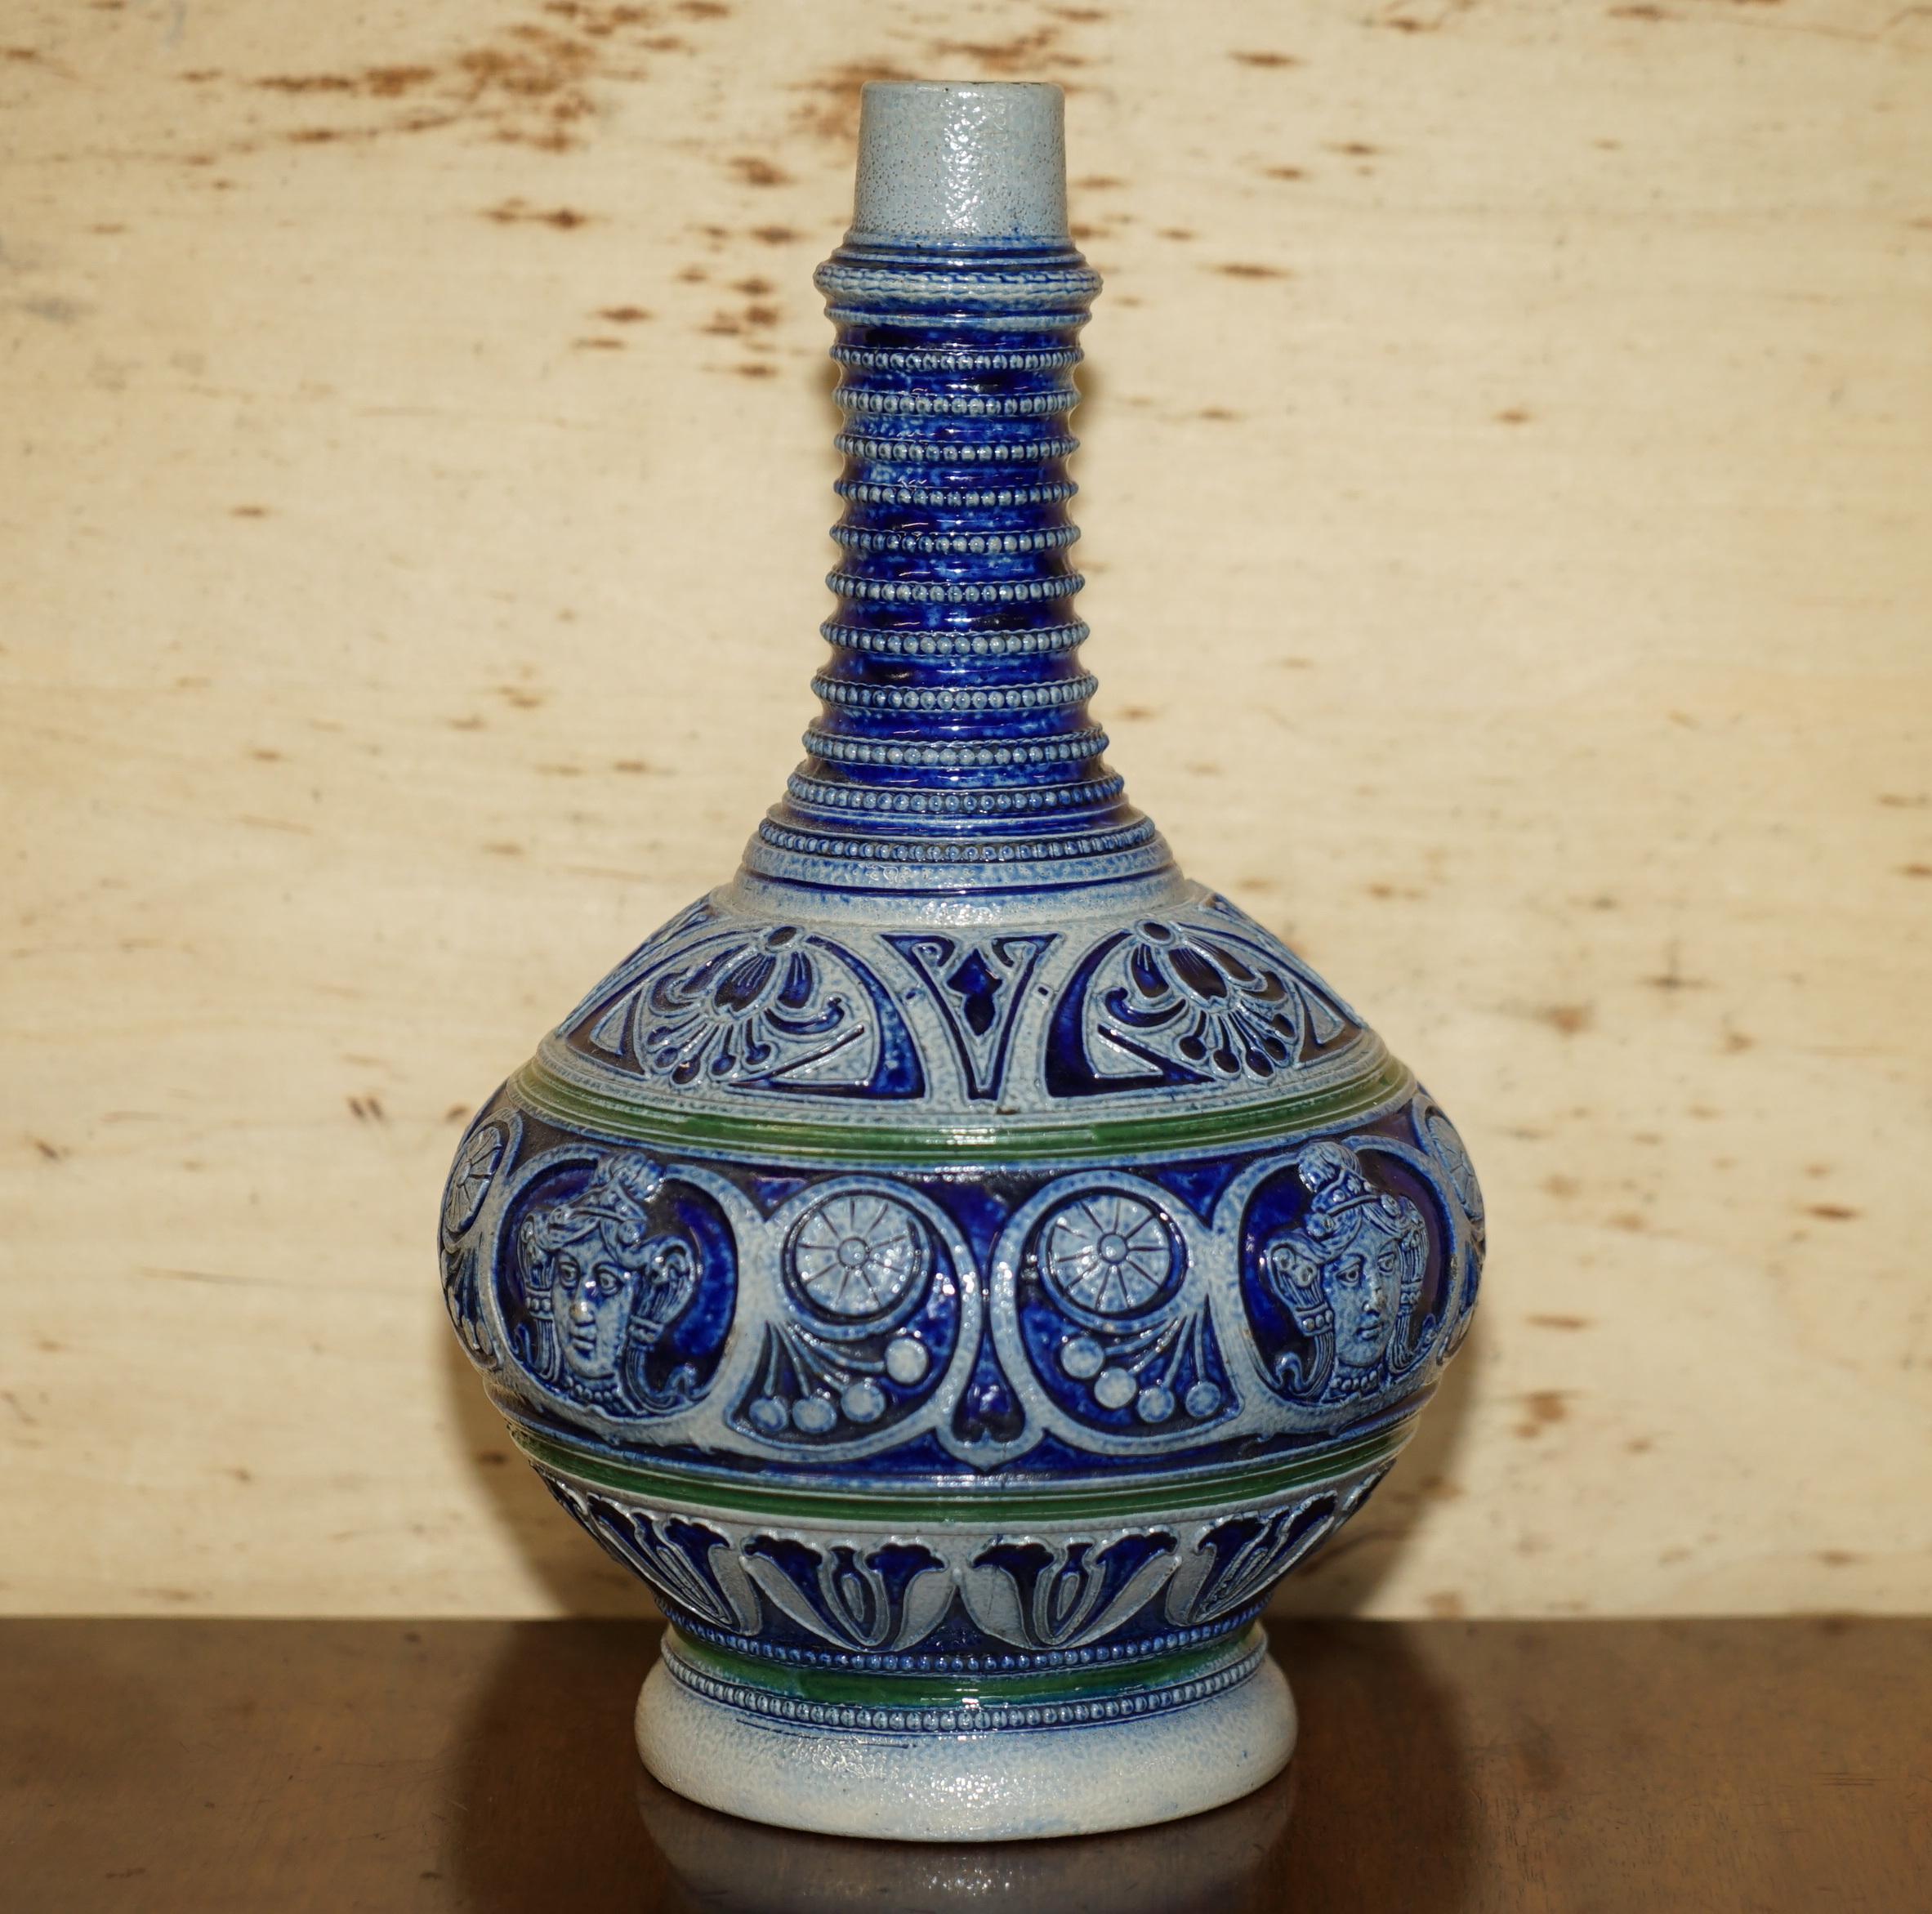 We are delighted to offer for sale this lovely Antique Westerwald pottery vase with Neoclassical figure heads

A very decorative stoneware vase in lovely antique order

The condition is good for the age as you can see in the pictures, there will